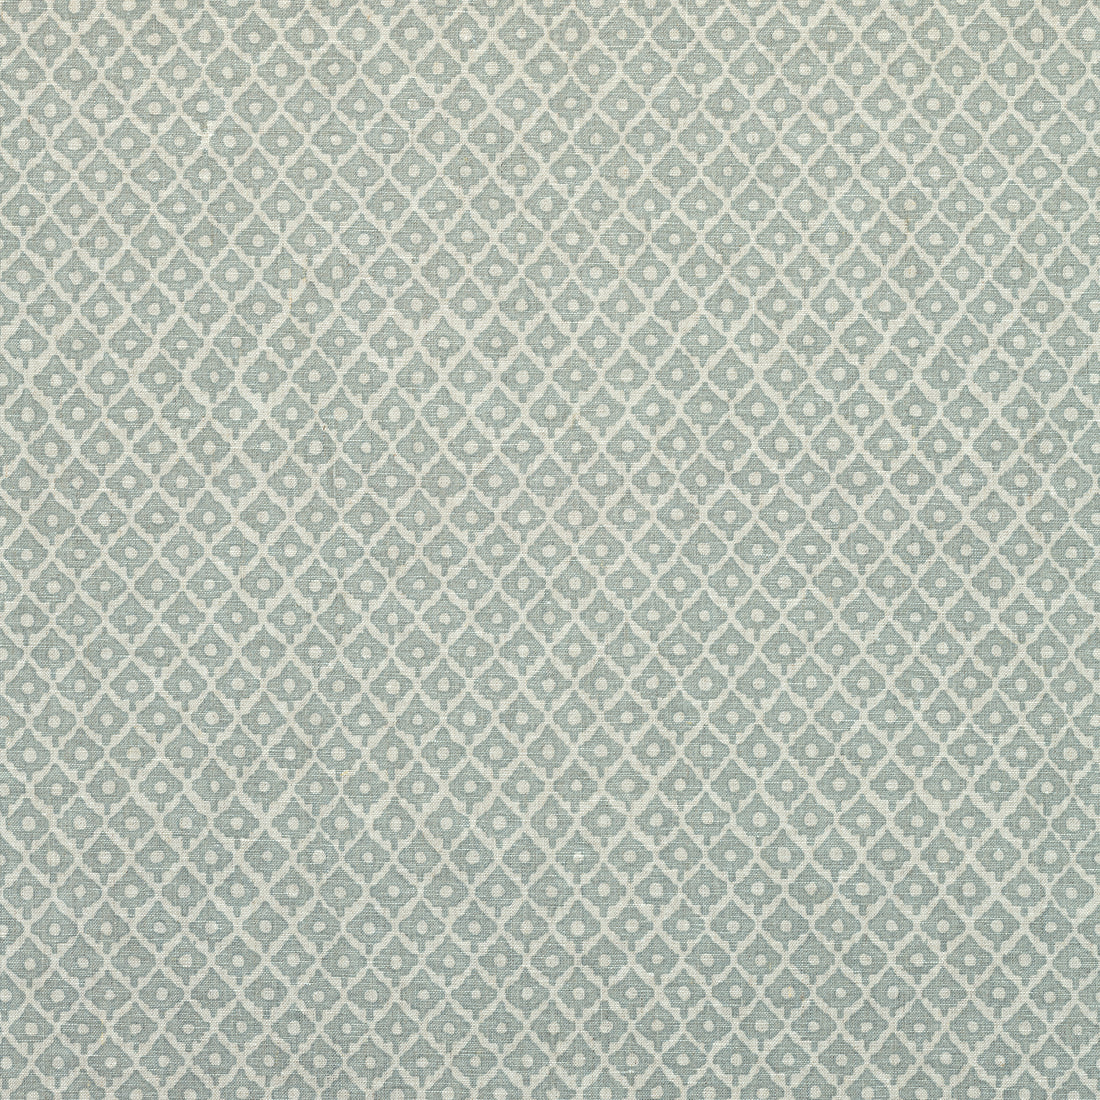 Petit Arbre fabric in spa blue on flax  color - pattern number AF9631 - by Anna French in the Savoy collection